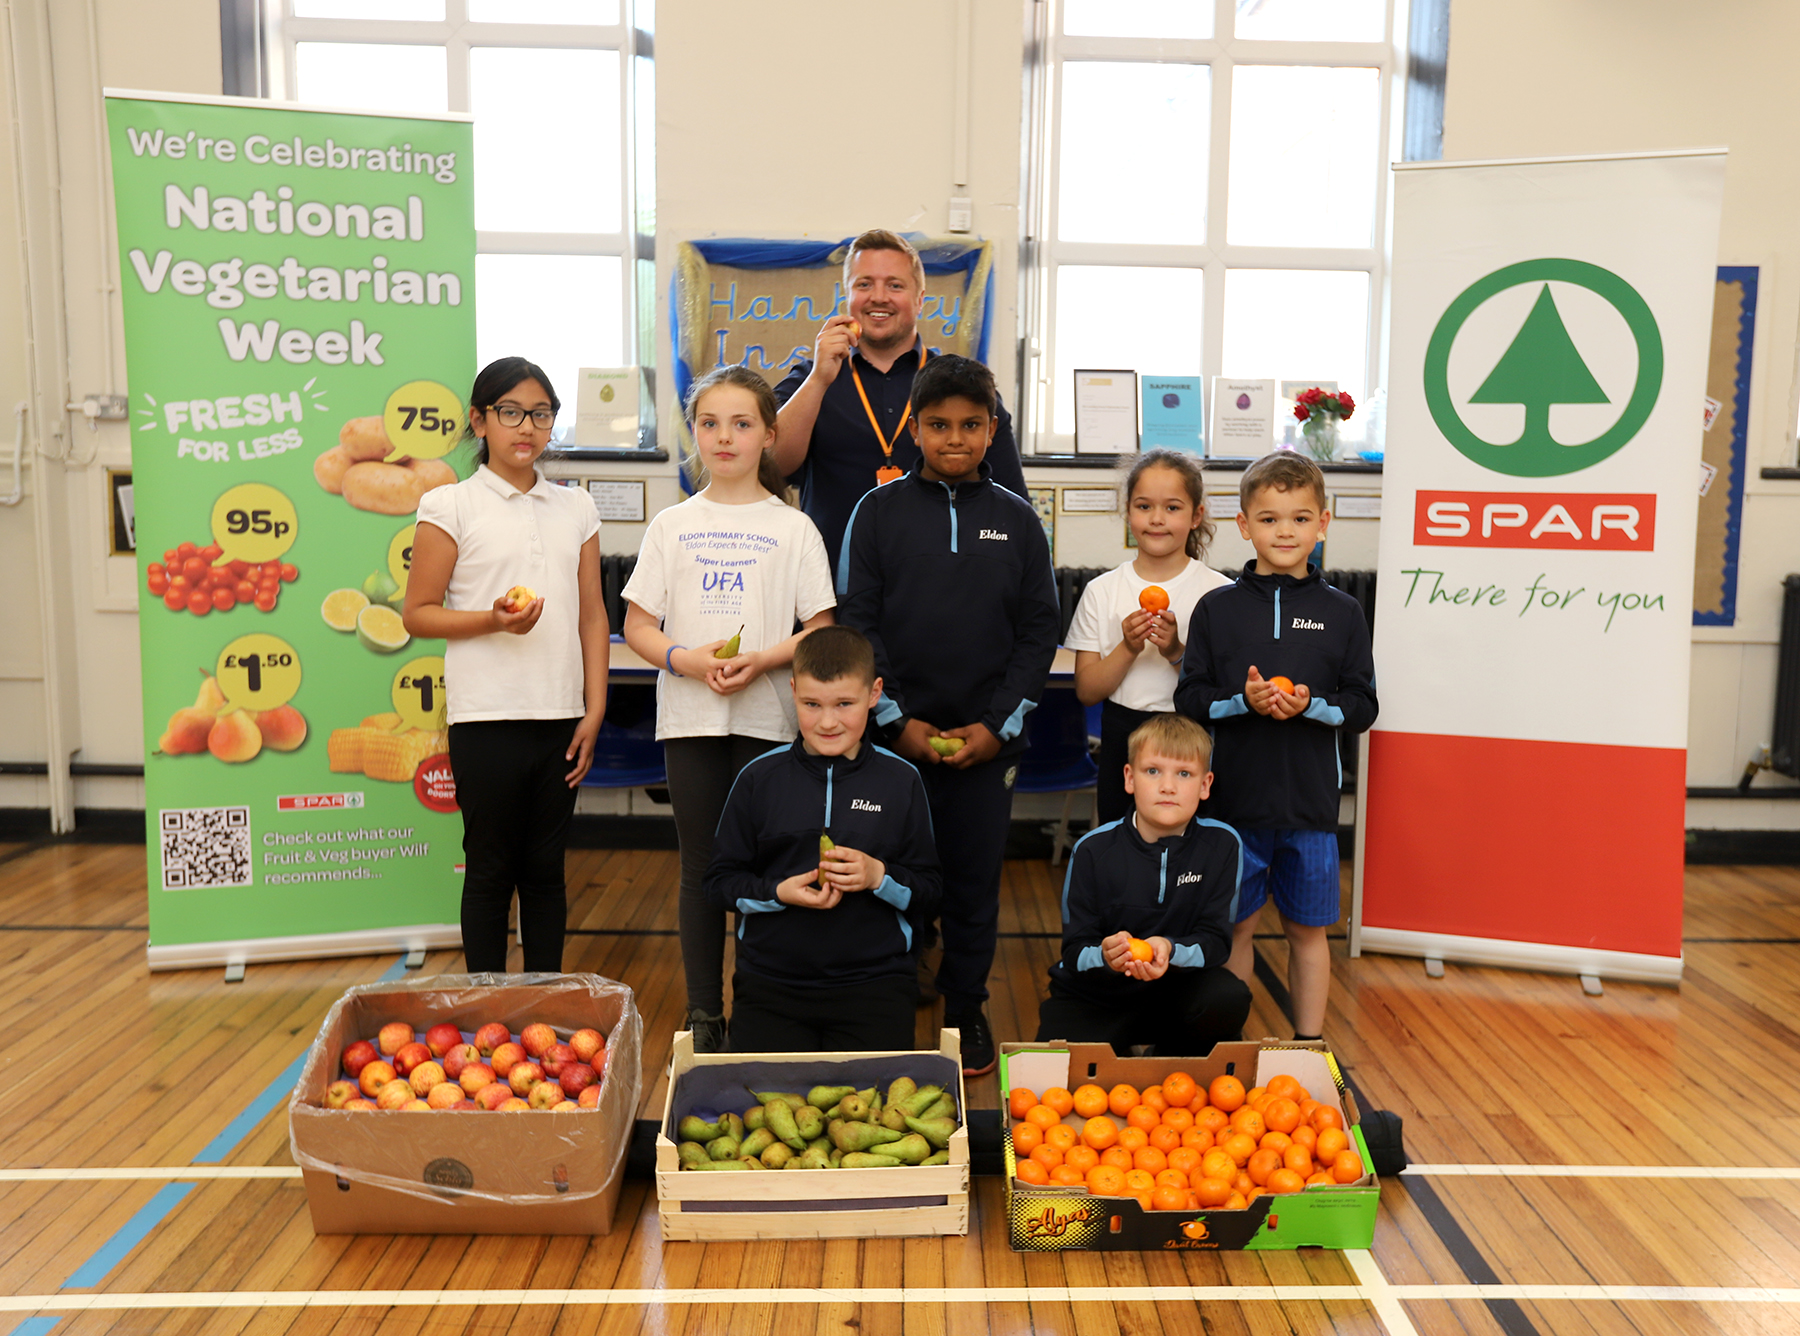 SPAR celebrates National Vegetarian Week with visits to Cumbria and Lancashire schools